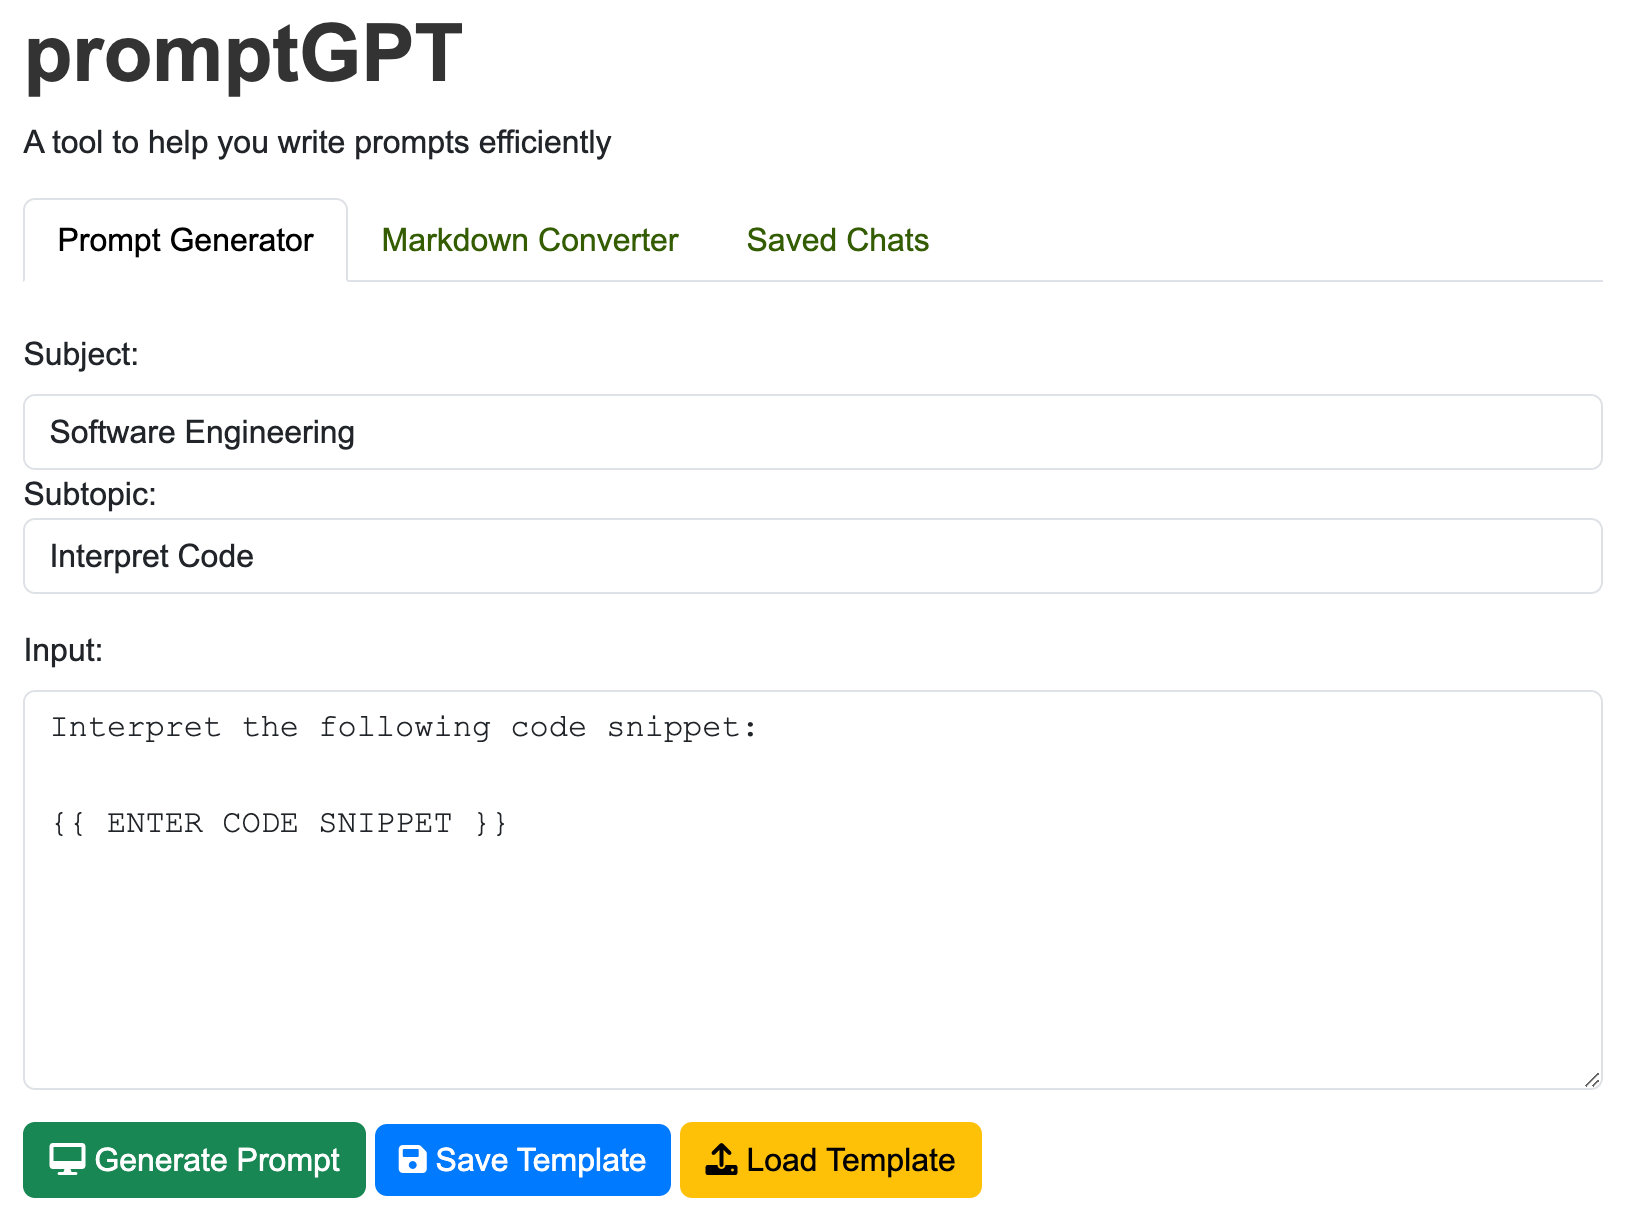 the user interface of promptGPT